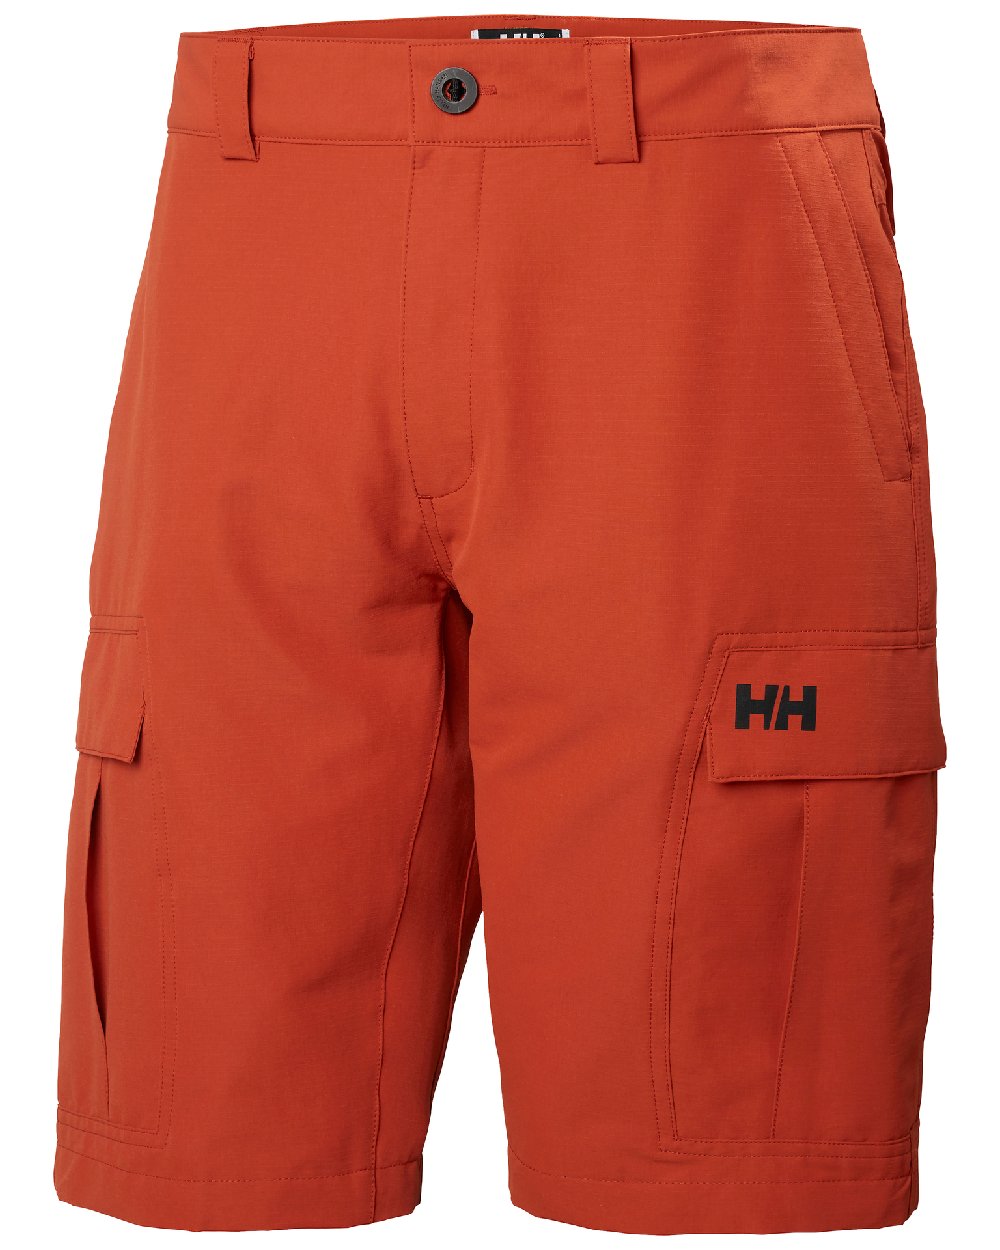 Canyon coloured Helly Hansen mens quick dry cargo shorts on white background 